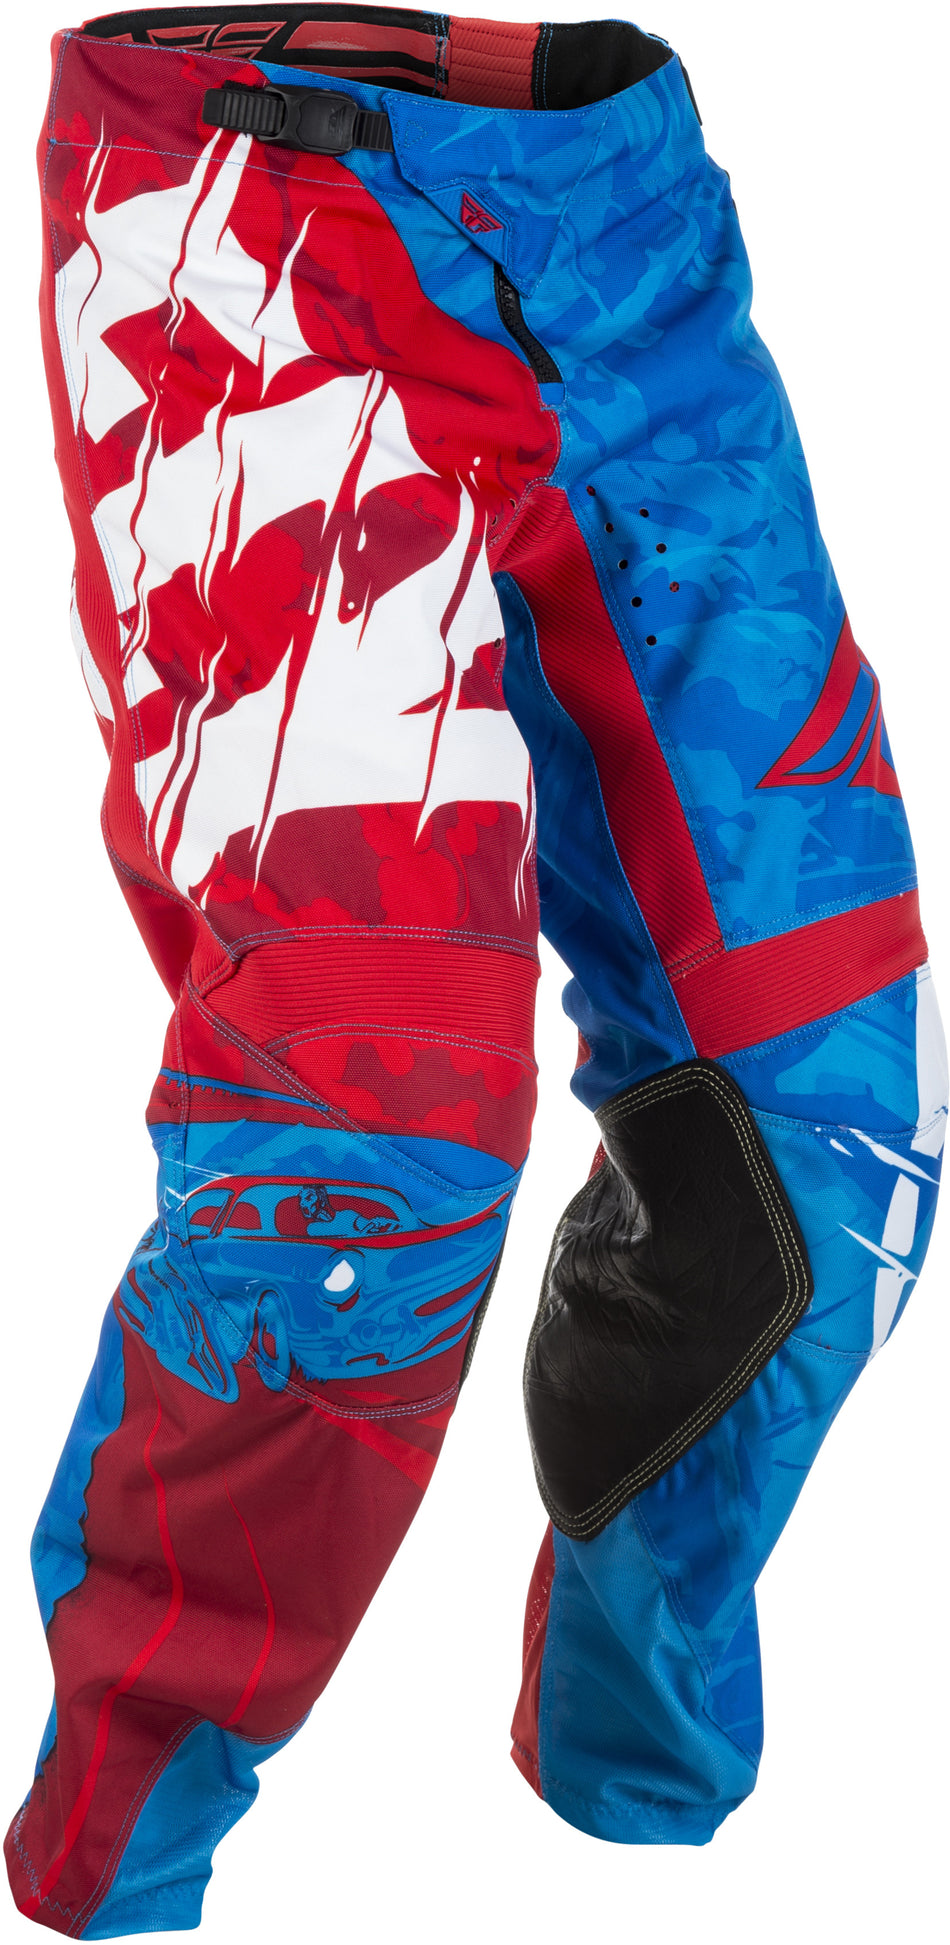 FLY RACING Kinetic Outlaw Pants Red/Blue Sz 32 371-53232